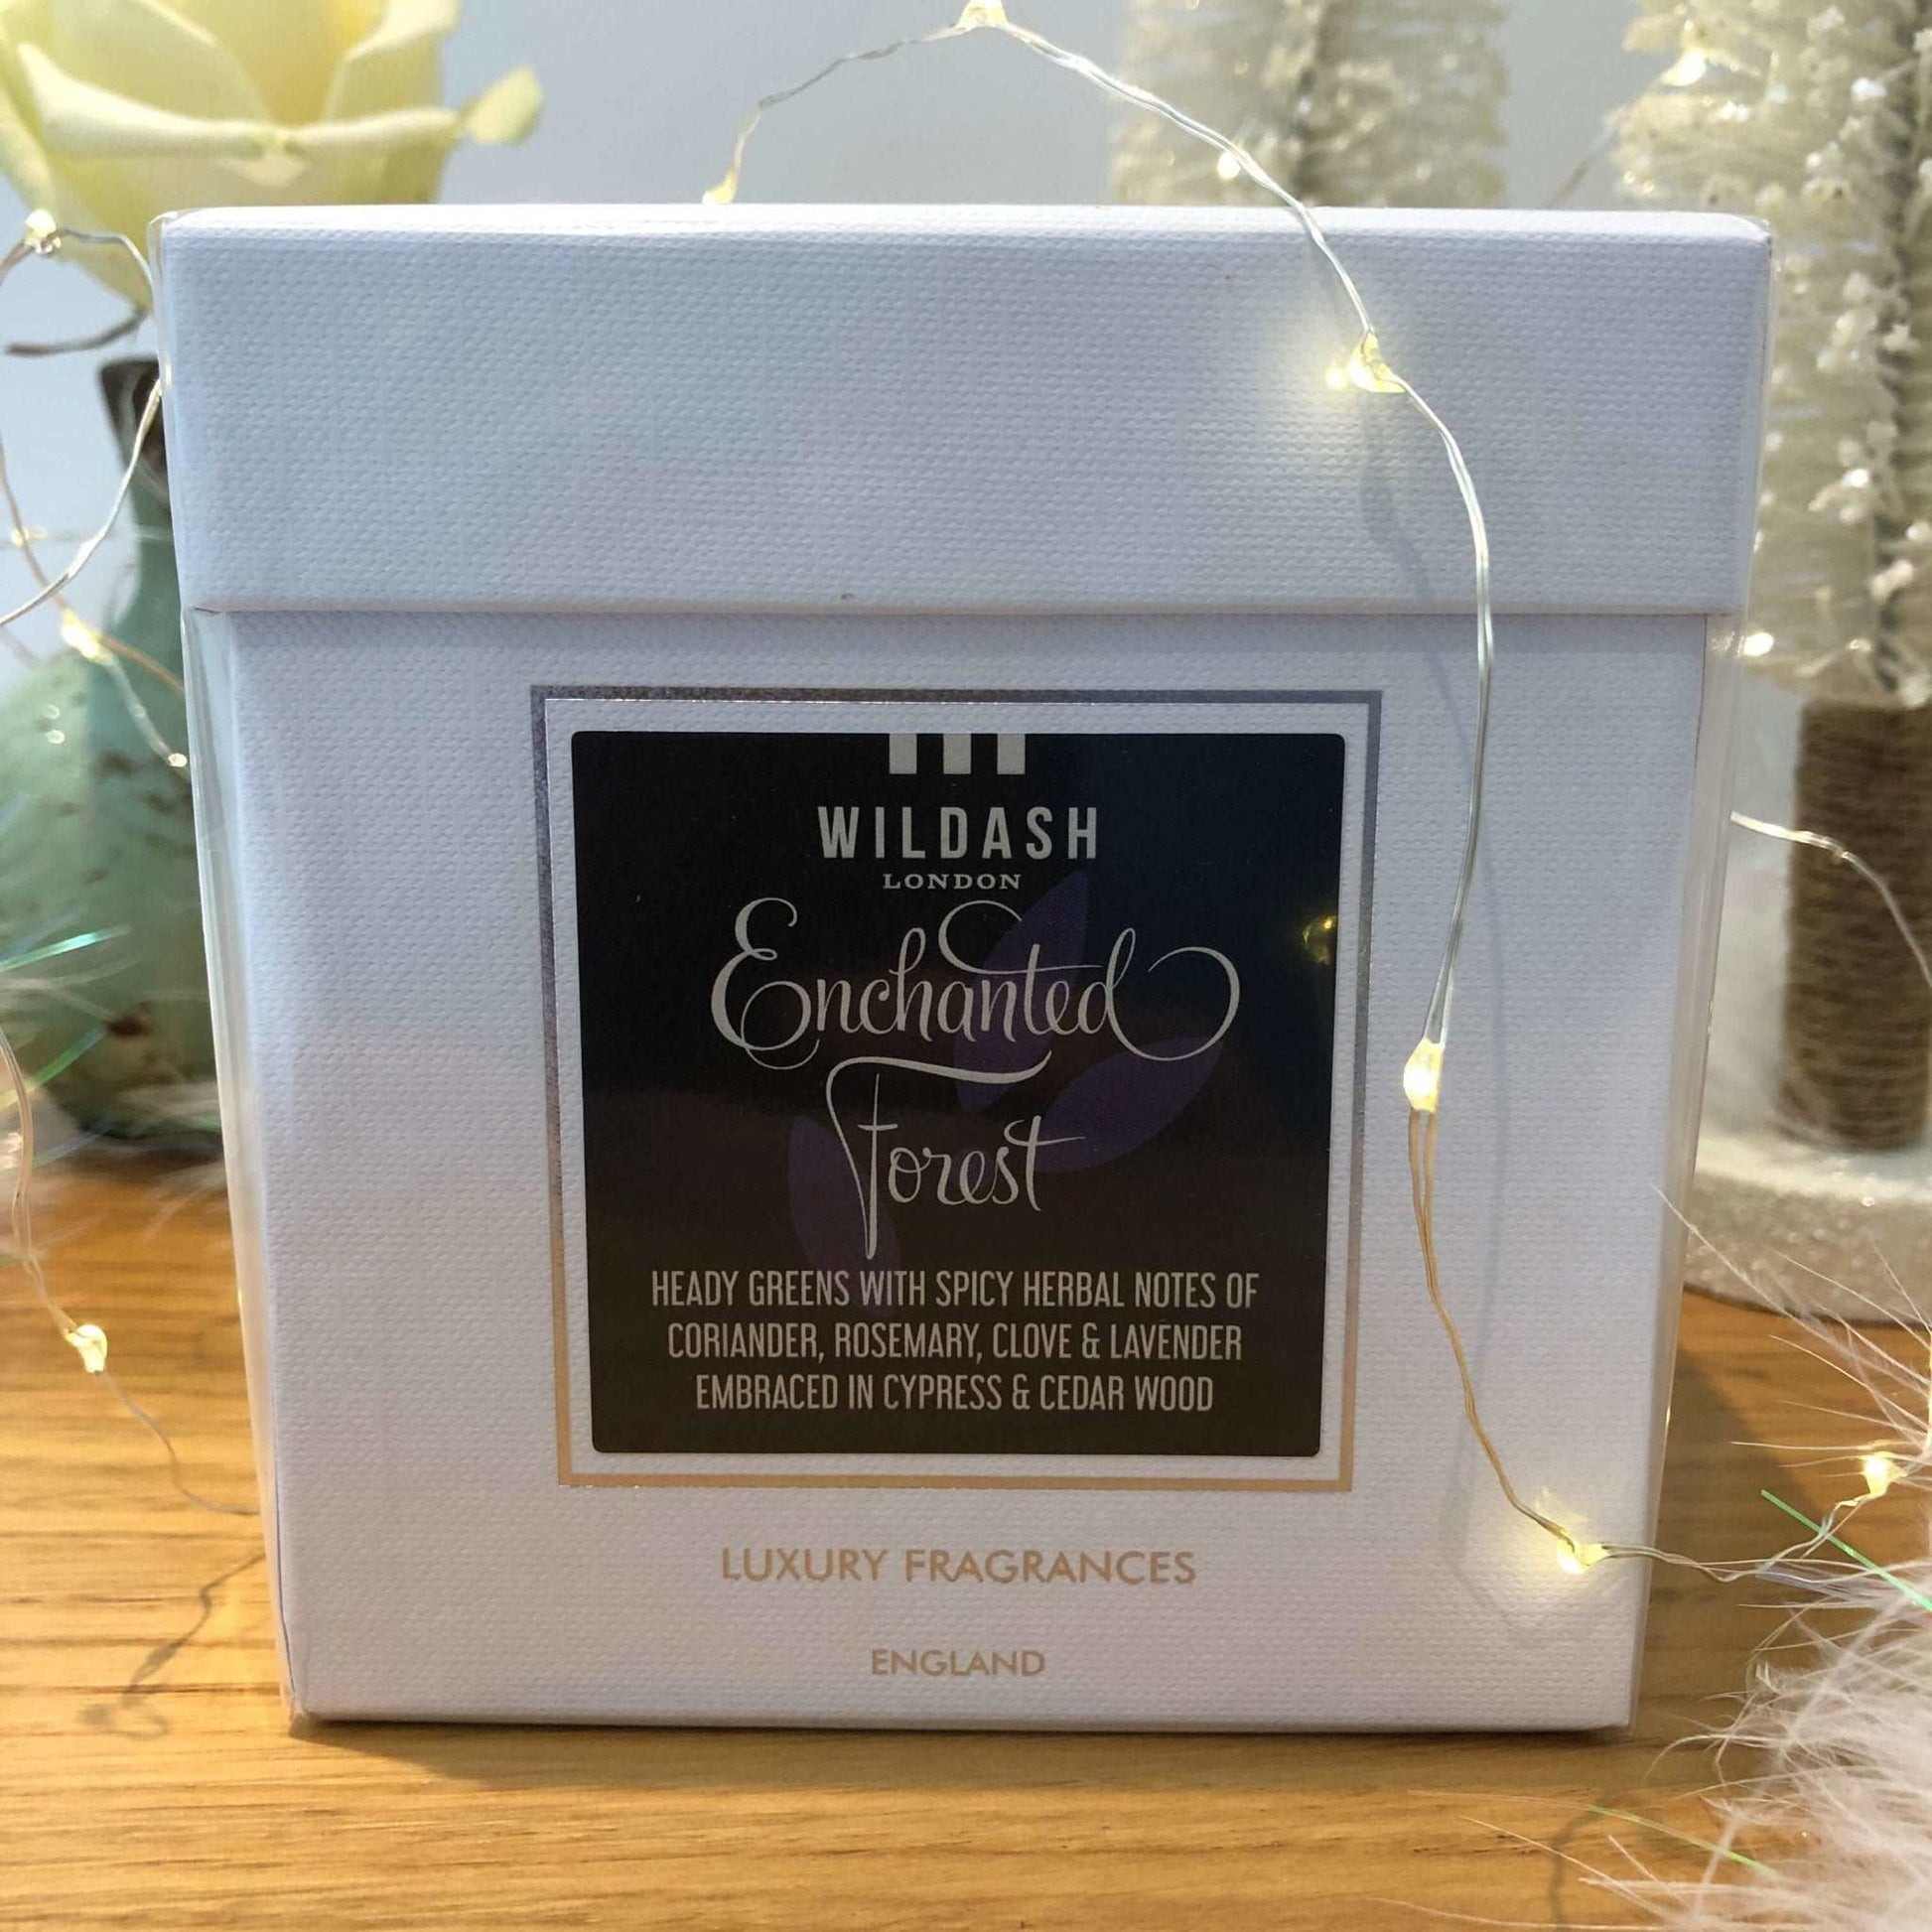 Enchanted Forest Fairytale Candle Large 30cl - Wildash London